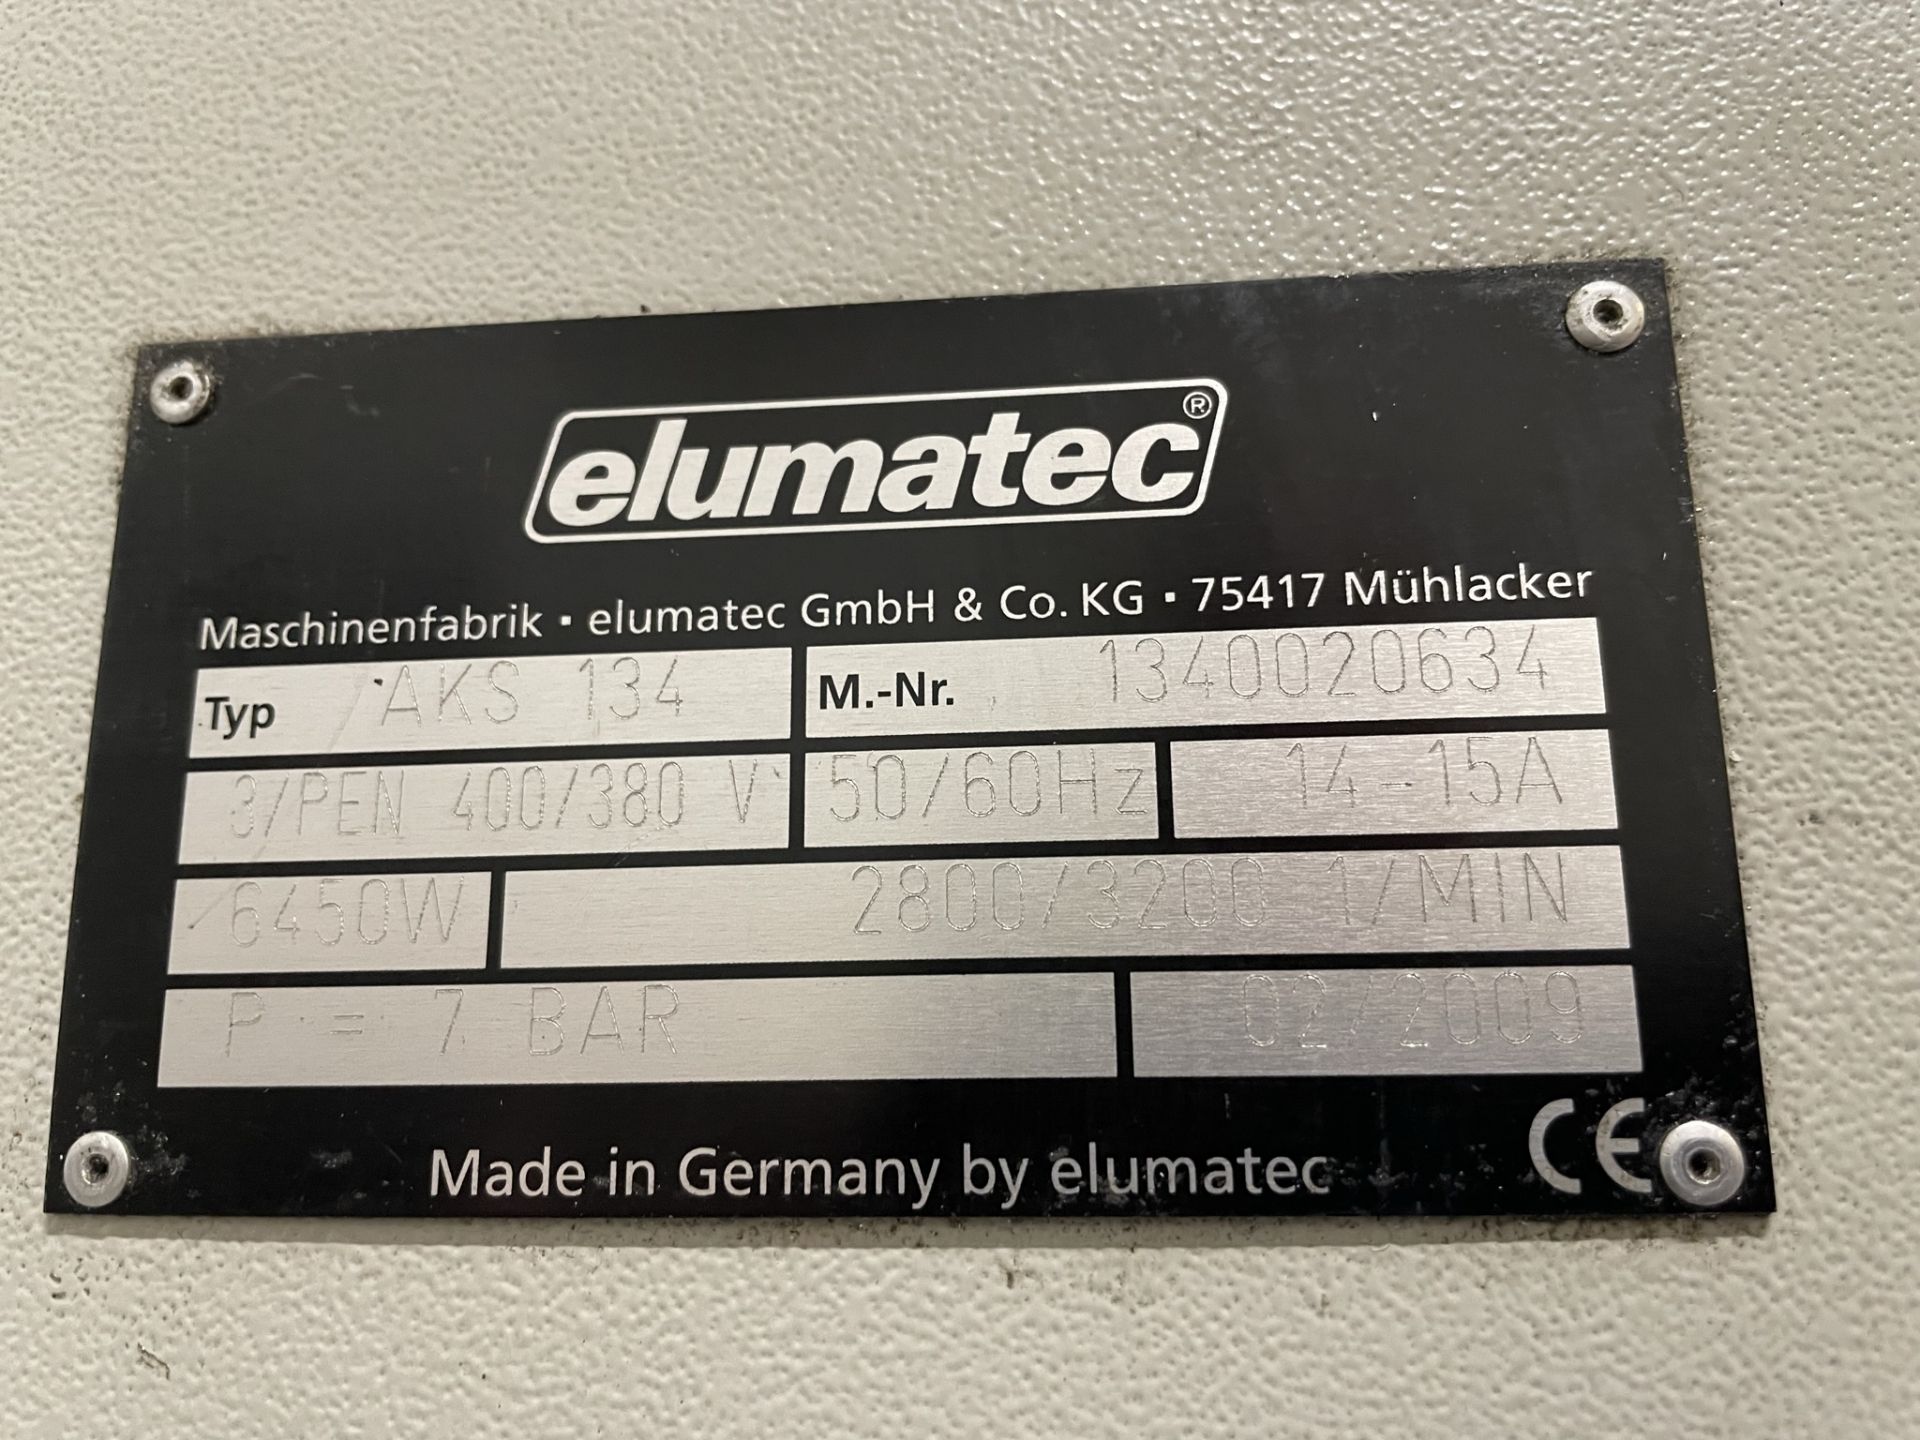 Elumatec, AKS134 twin head end miller notching saw, Serial No. 1340020634 (DOM: 2009) - Image 6 of 6